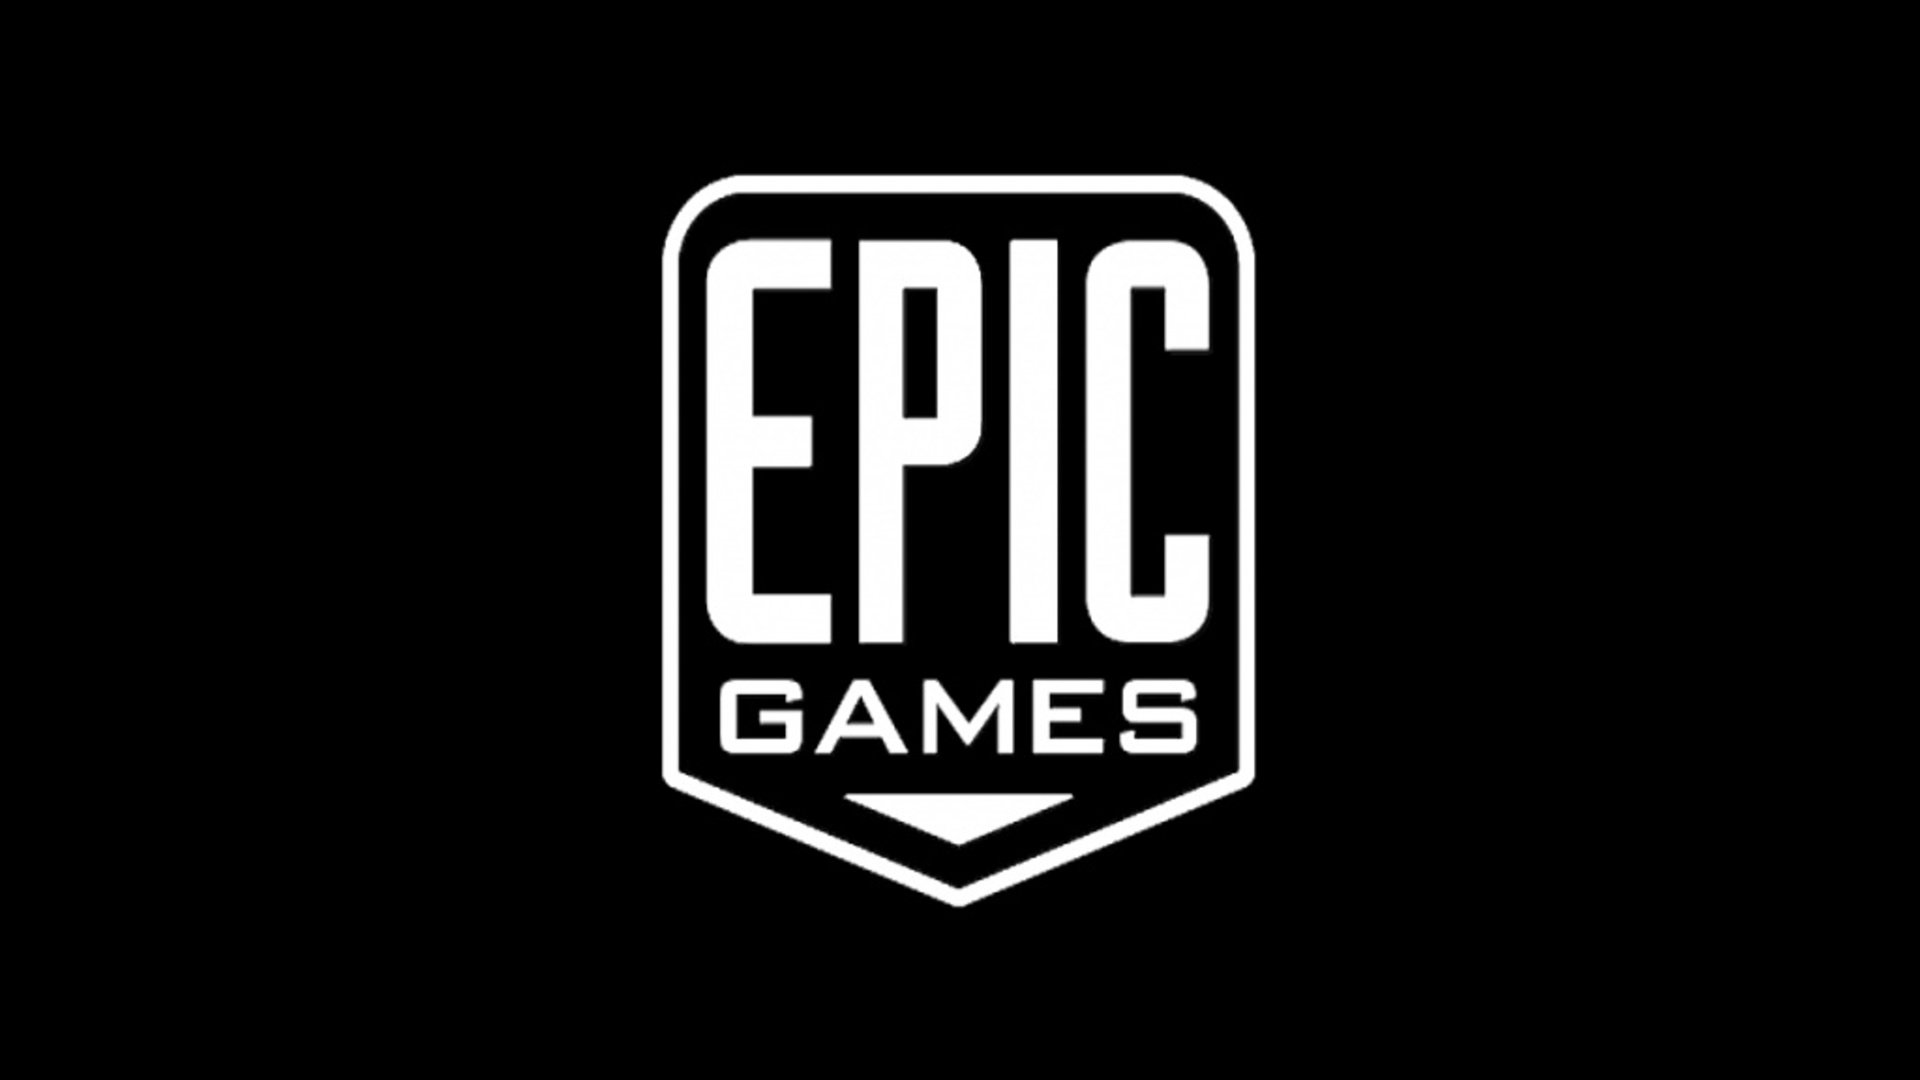 Epic Games raises 1 billion funding round, including 200 million from